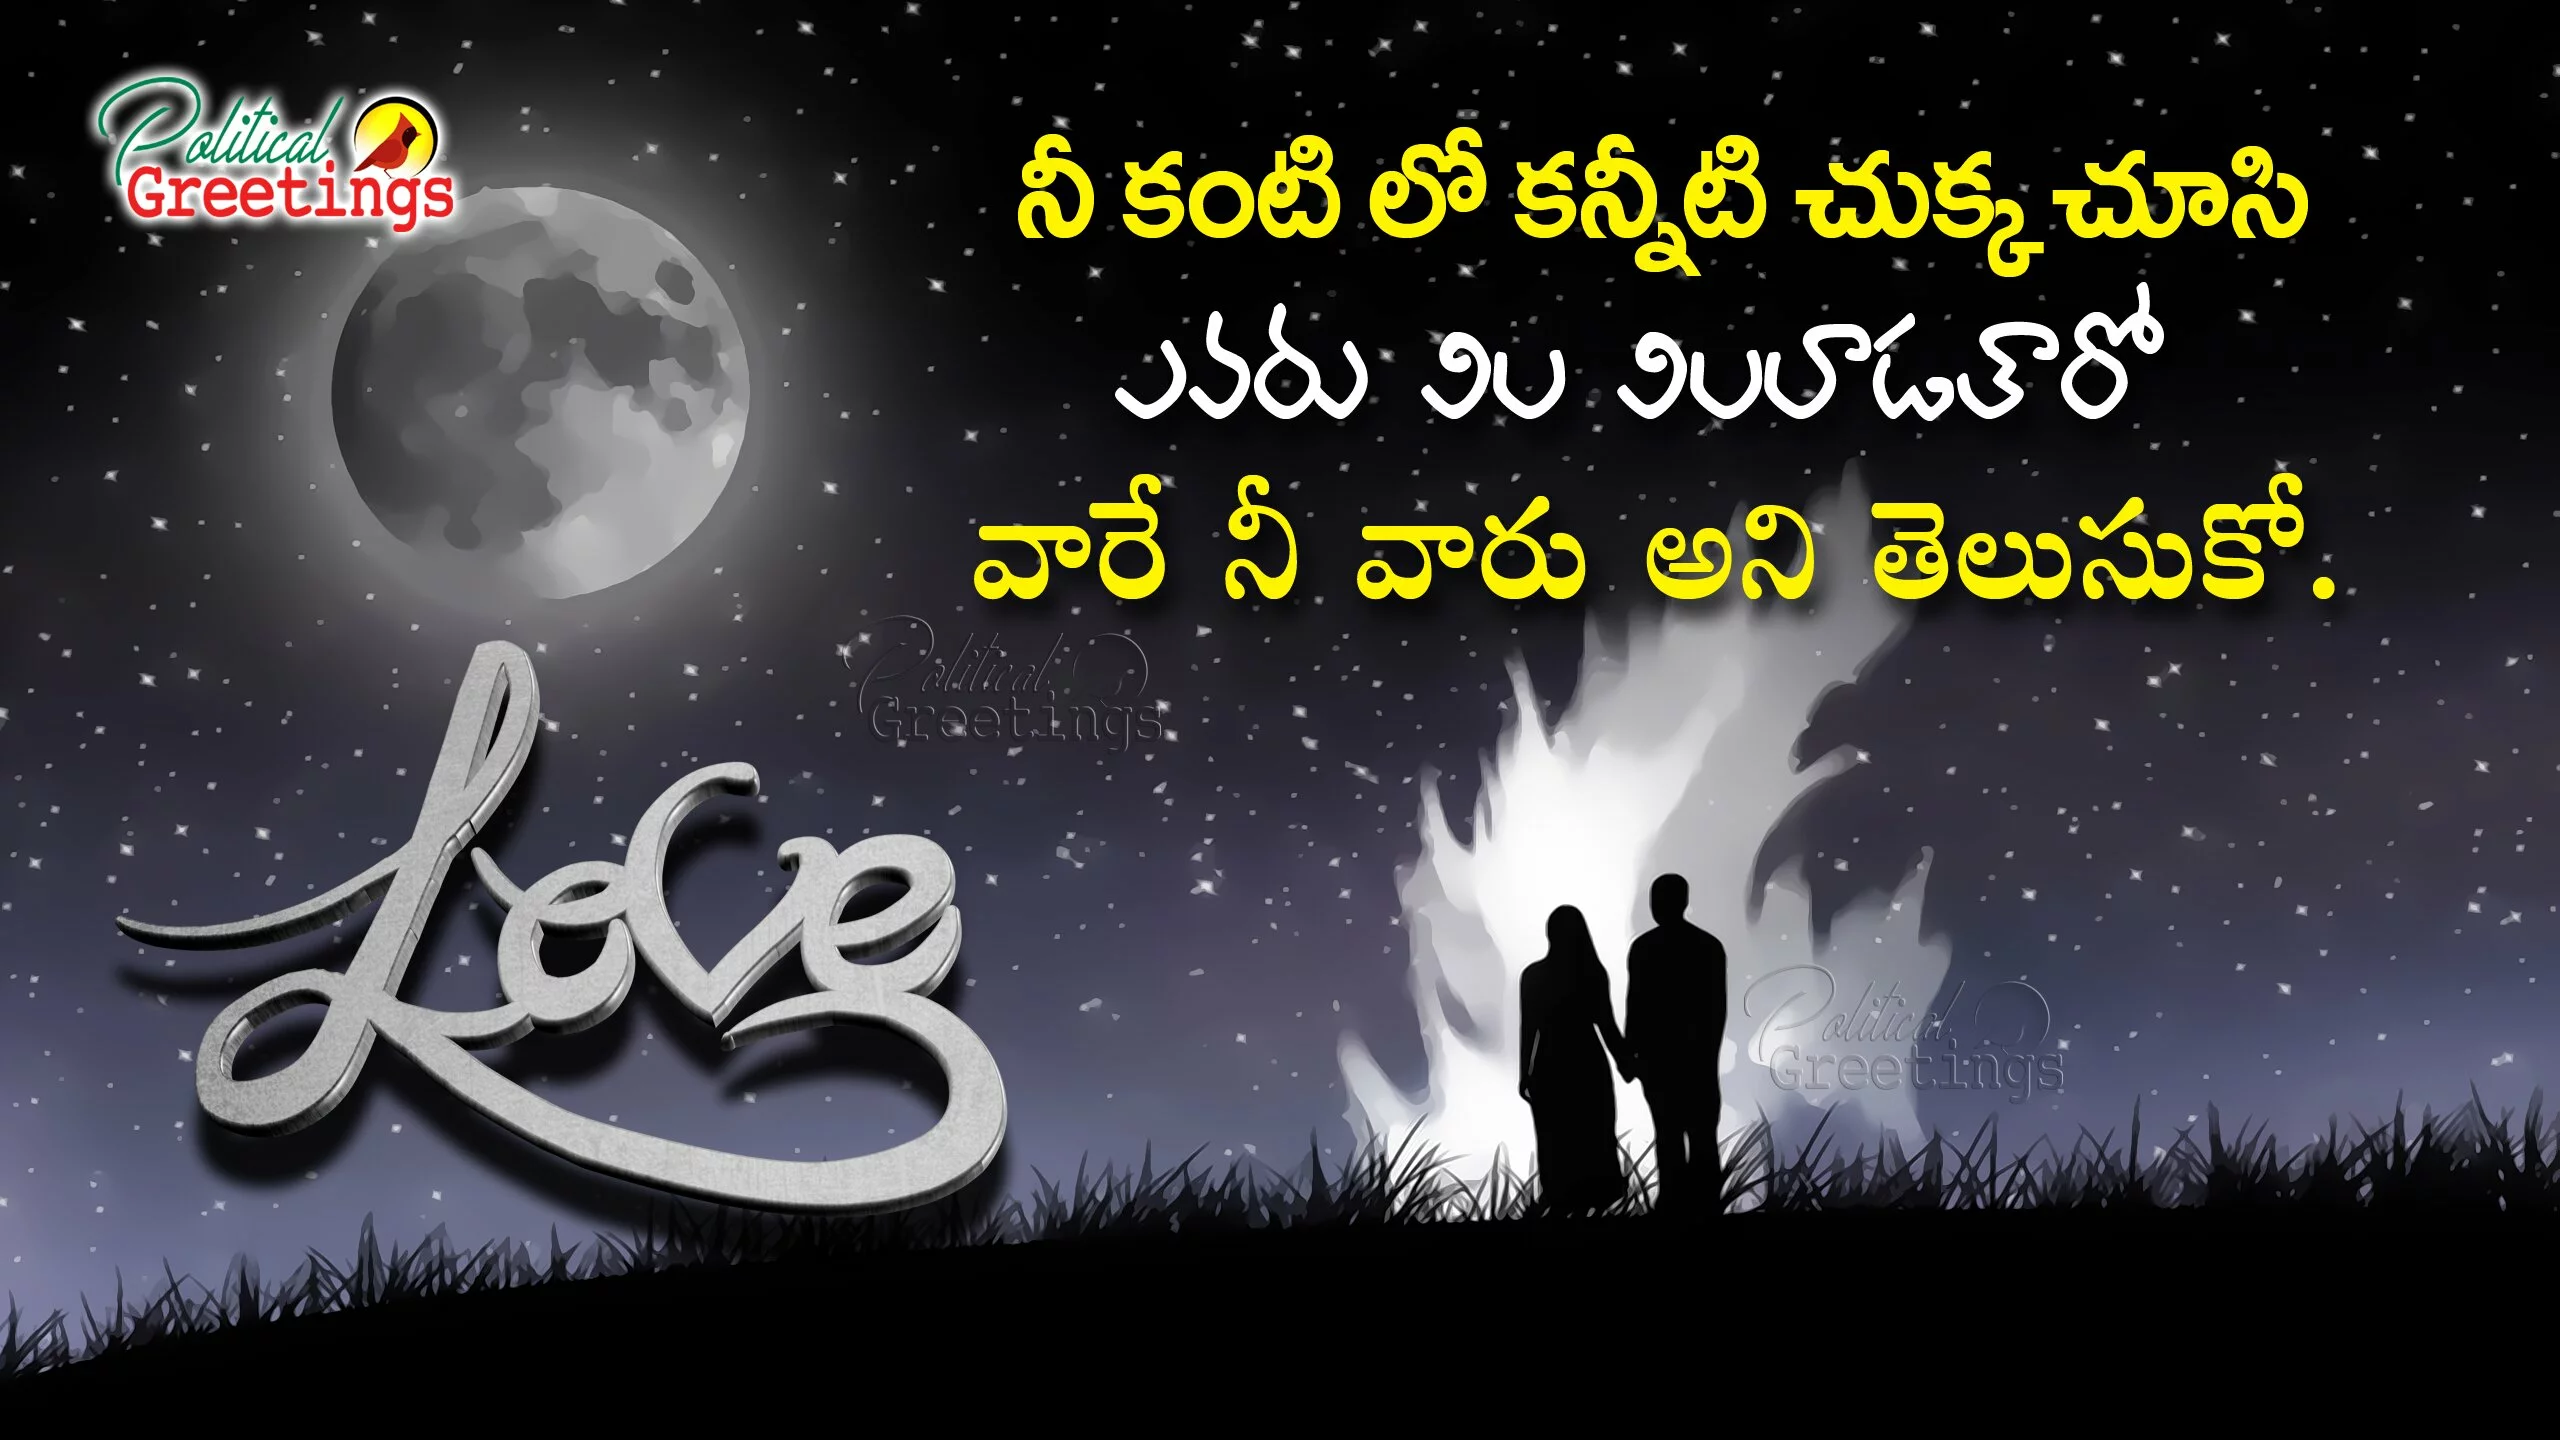 Heart touching love quotes in telugu